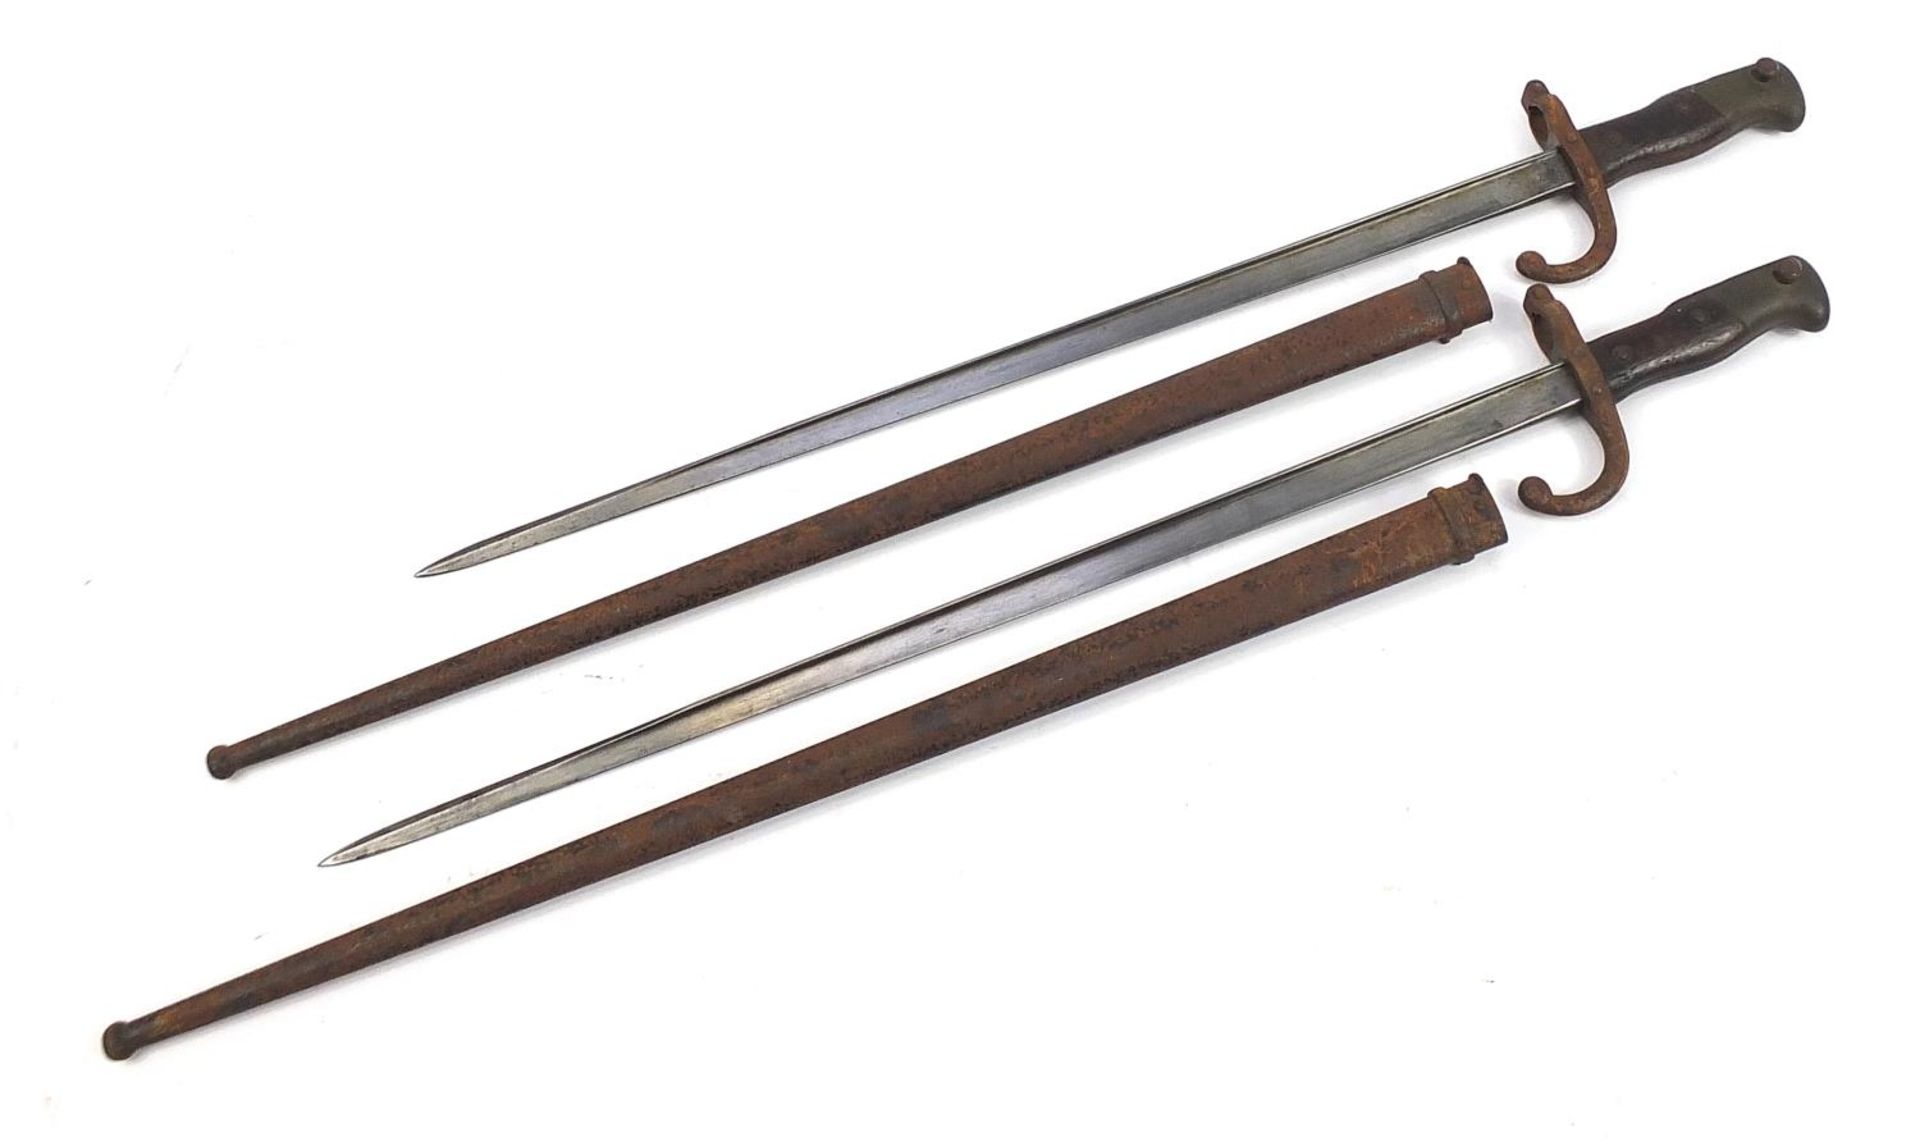 Pair of French military interest St Etienne bayonets with scabbards, each 66cm in length - Image 7 of 9